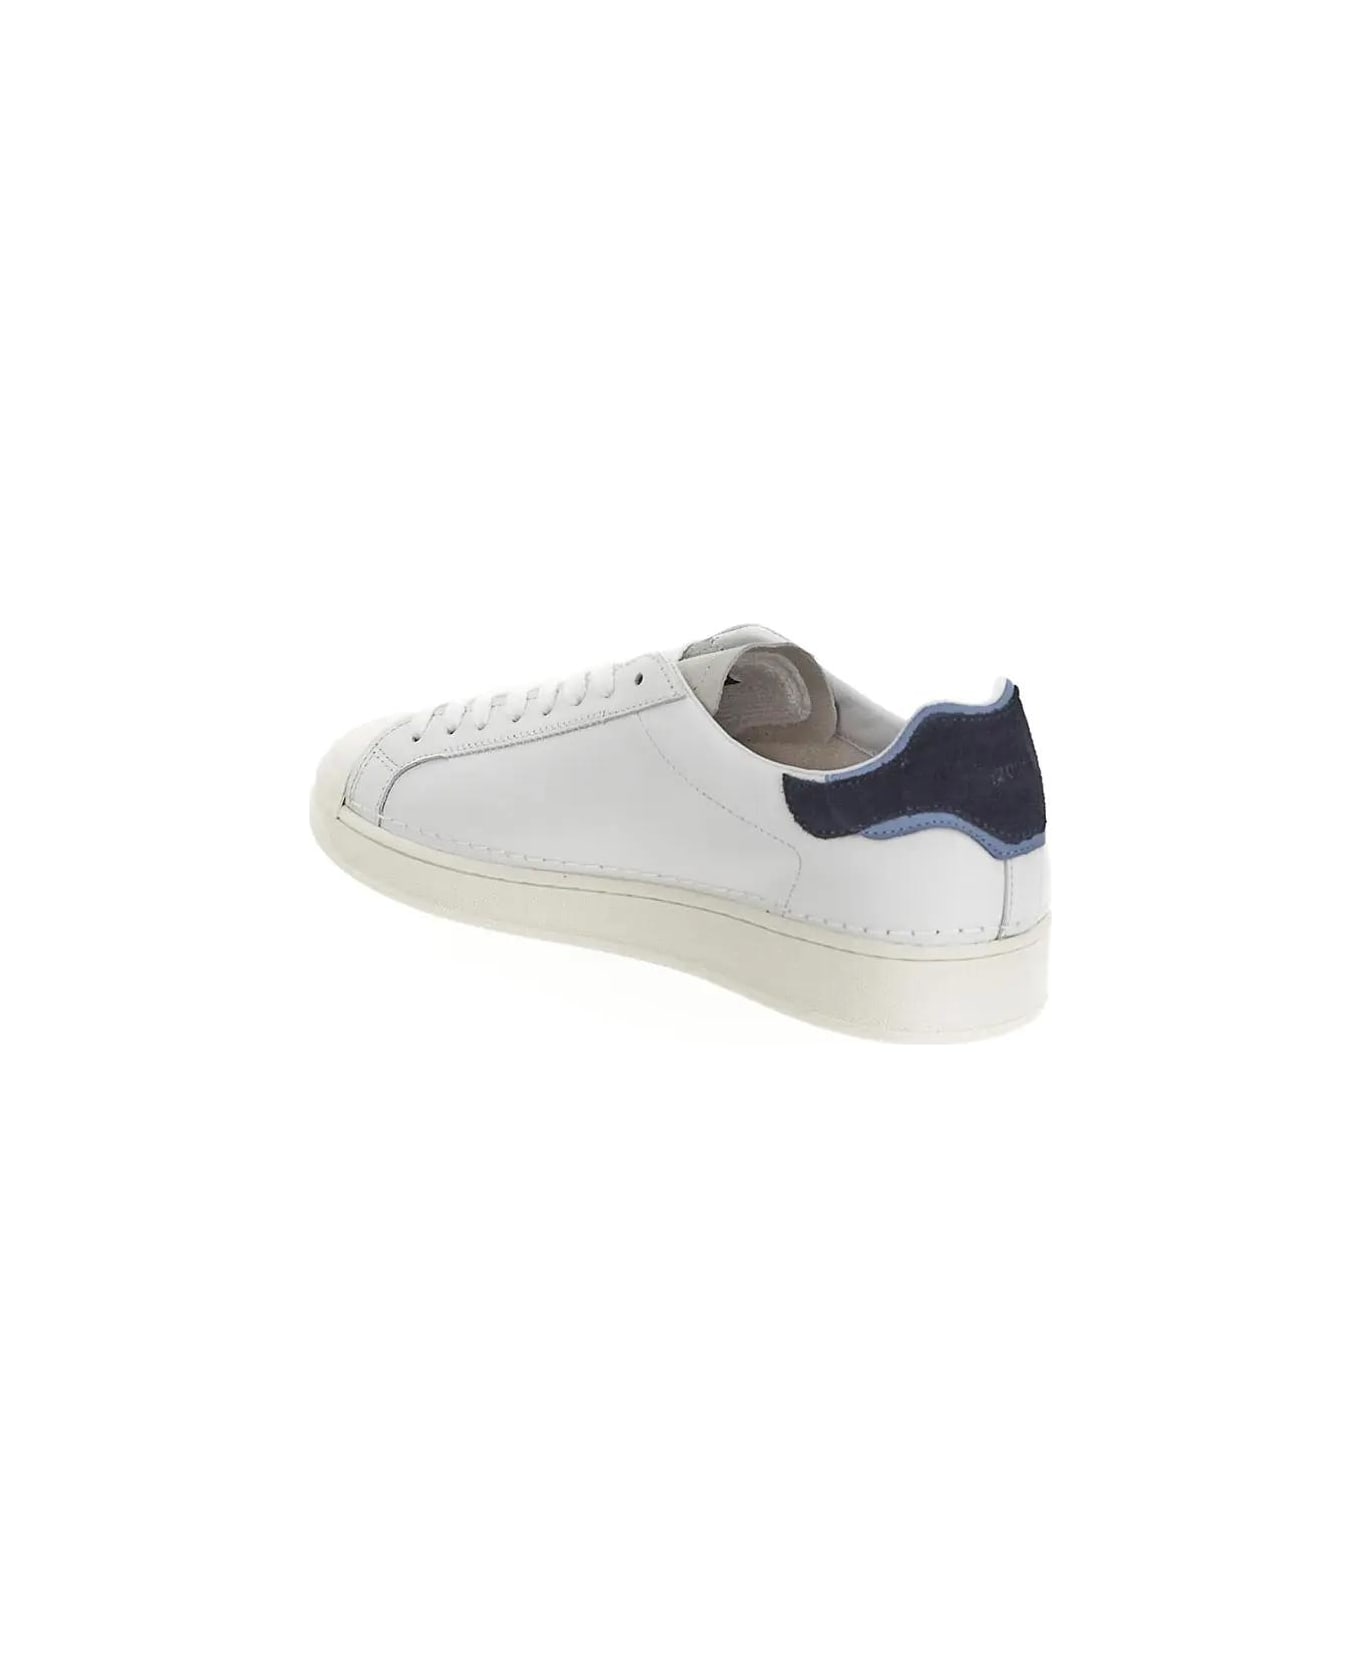 D.A.T.E. Leather Sneakers - Bianco / Blu